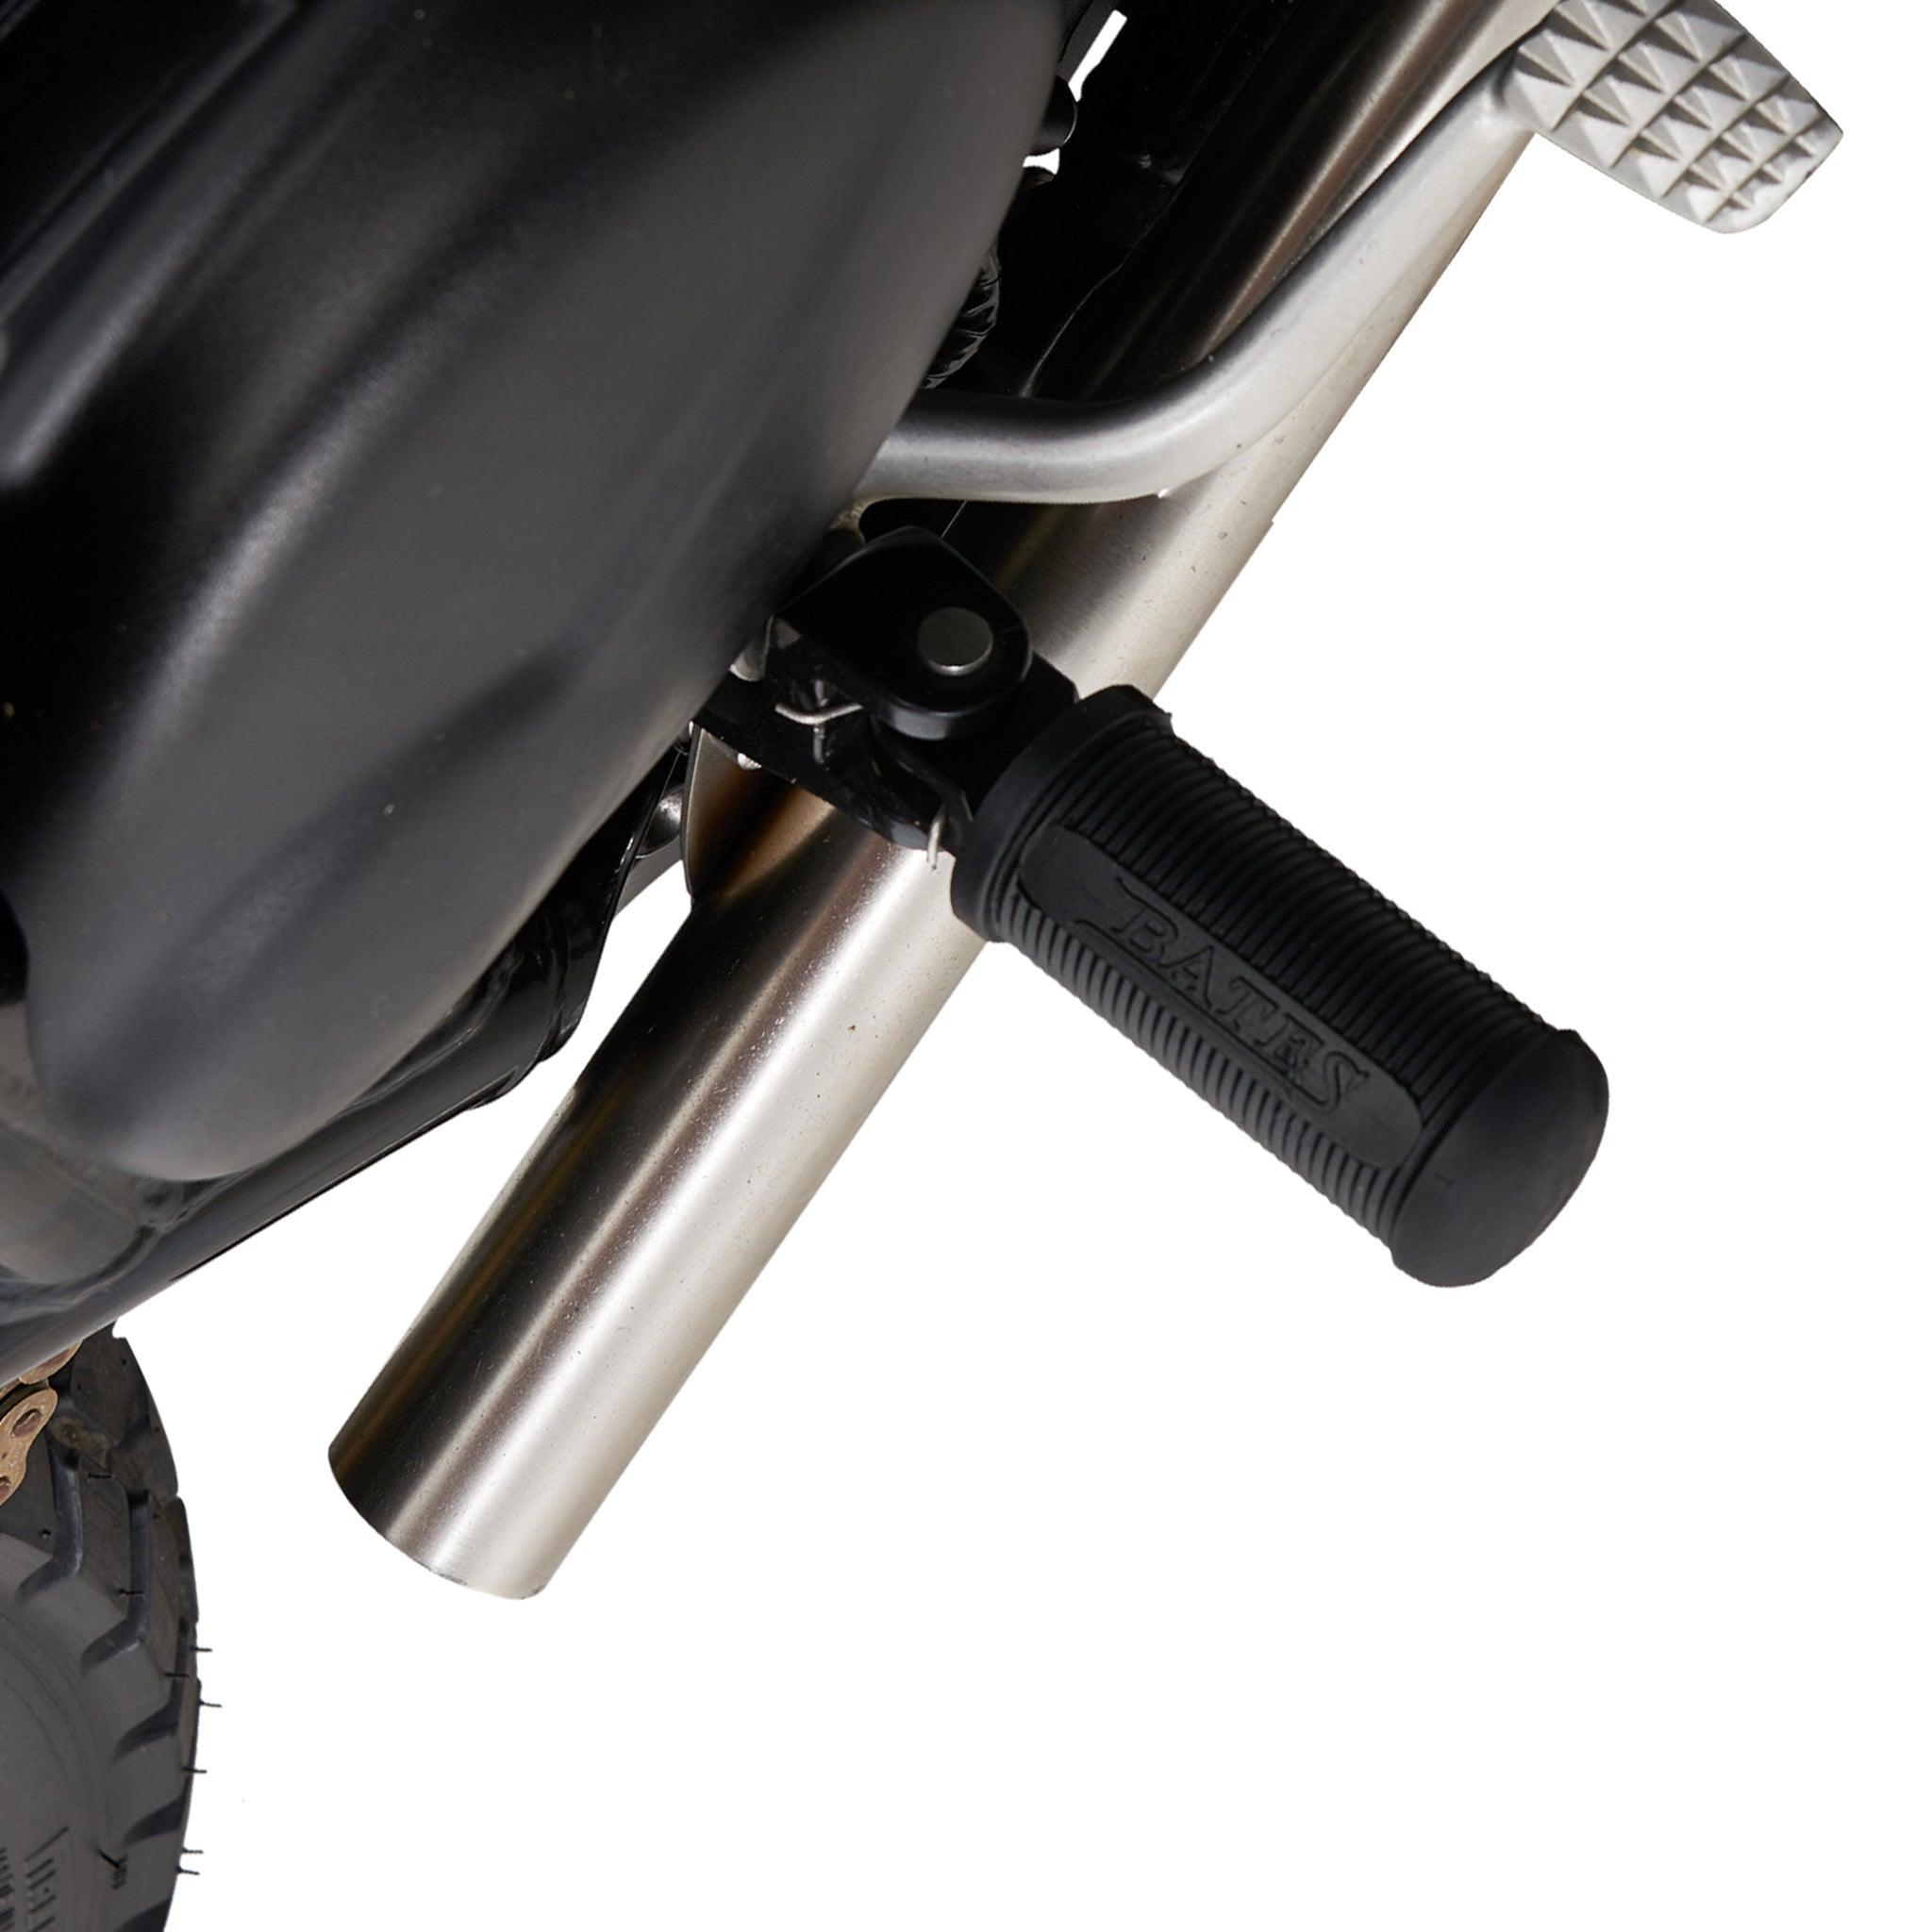 Bates Style Foot Peg Kit for Triumph Motorcycles